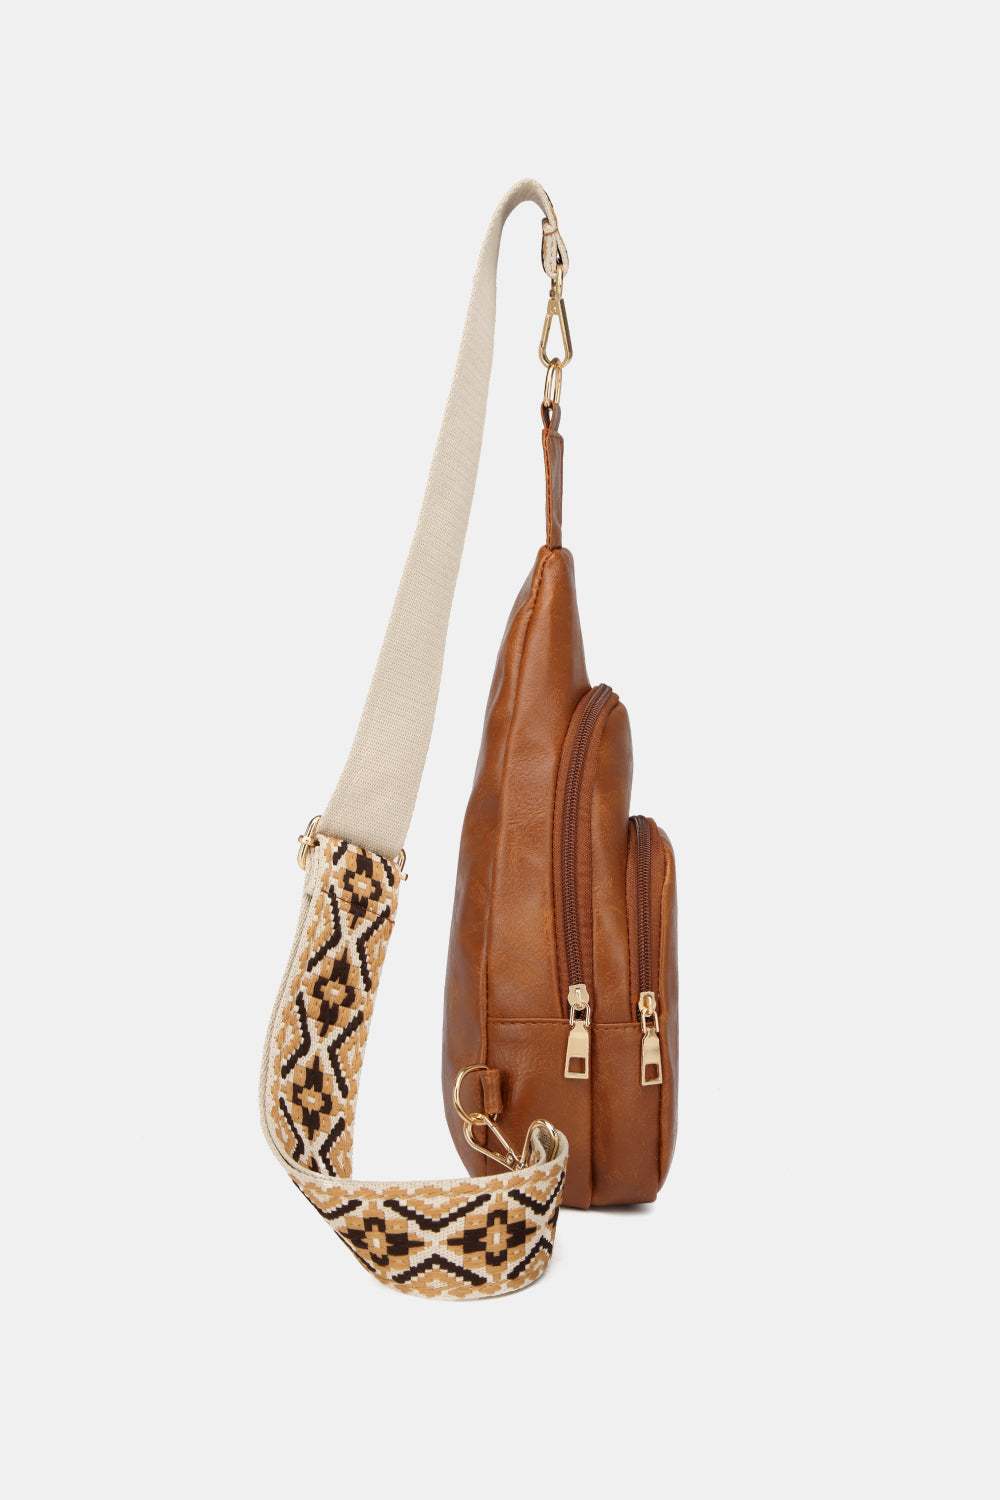 Vegan Leather Sling Bag With Printed Crossbody Strap